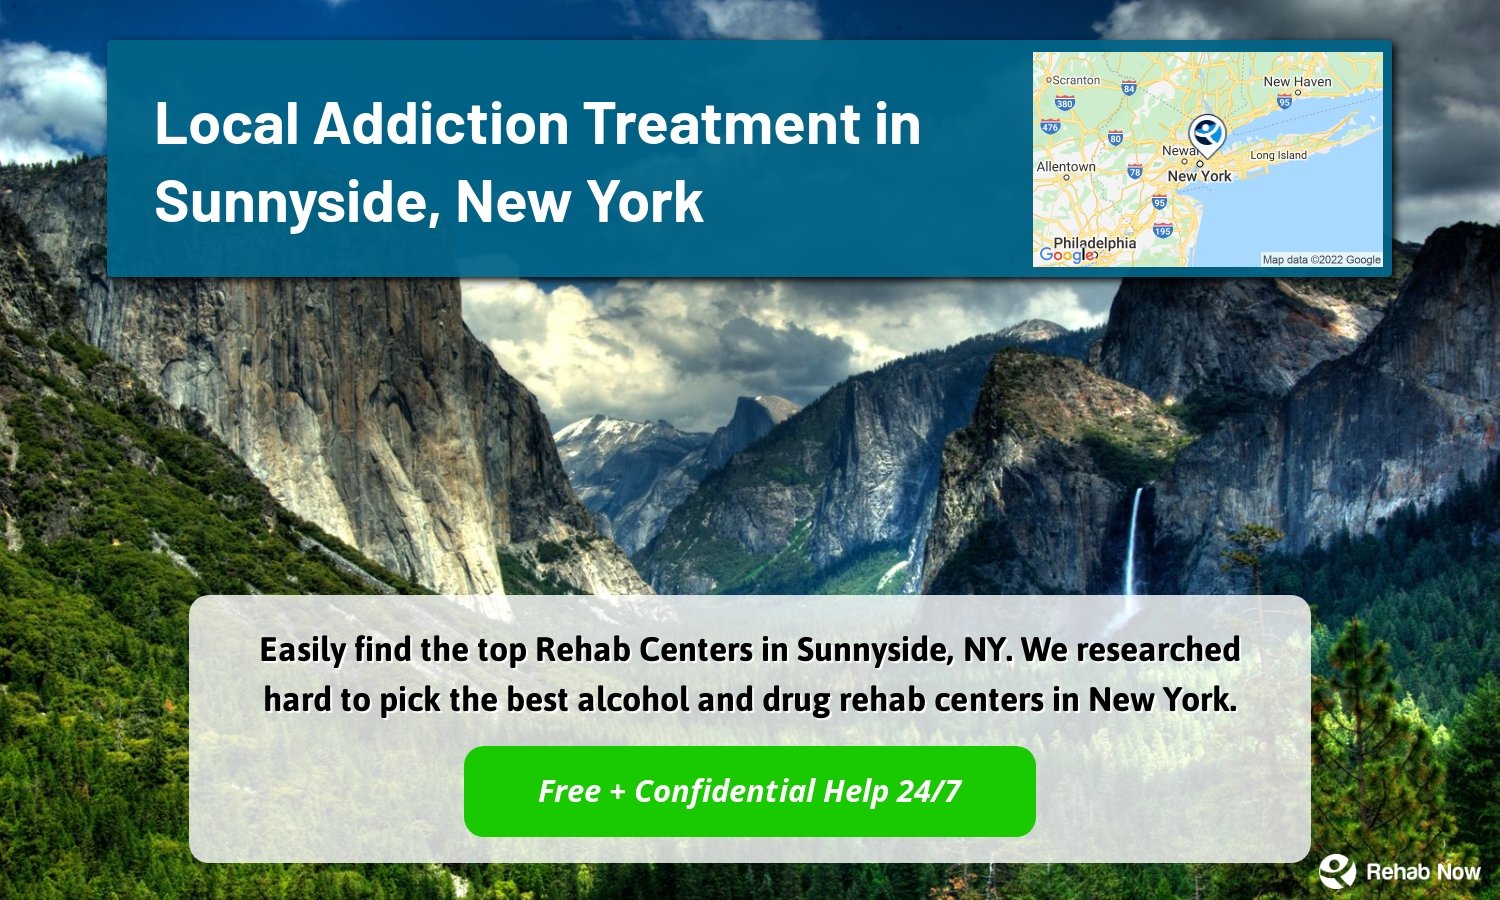 Easily find the top Rehab Centers in Sunnyside, NY. We researched hard to pick the best alcohol and drug rehab centers in New York.